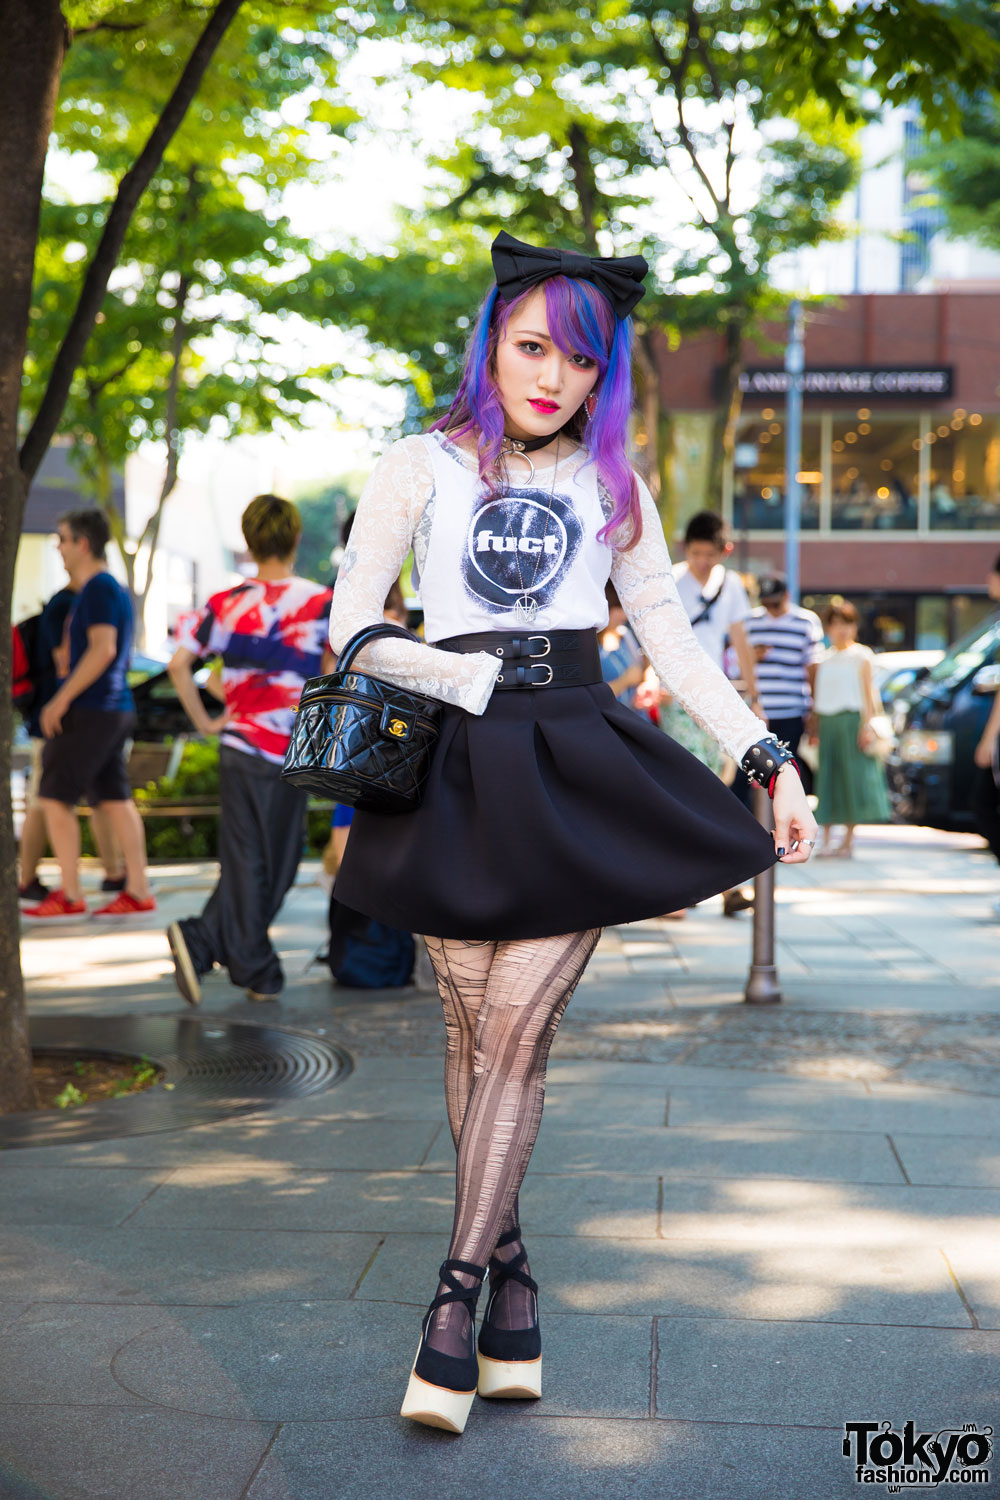 Moth in Lilac Guitarist in Harajuku w/ FUCT, Chanel, Tokyo Bopper & Motionless in White Gear